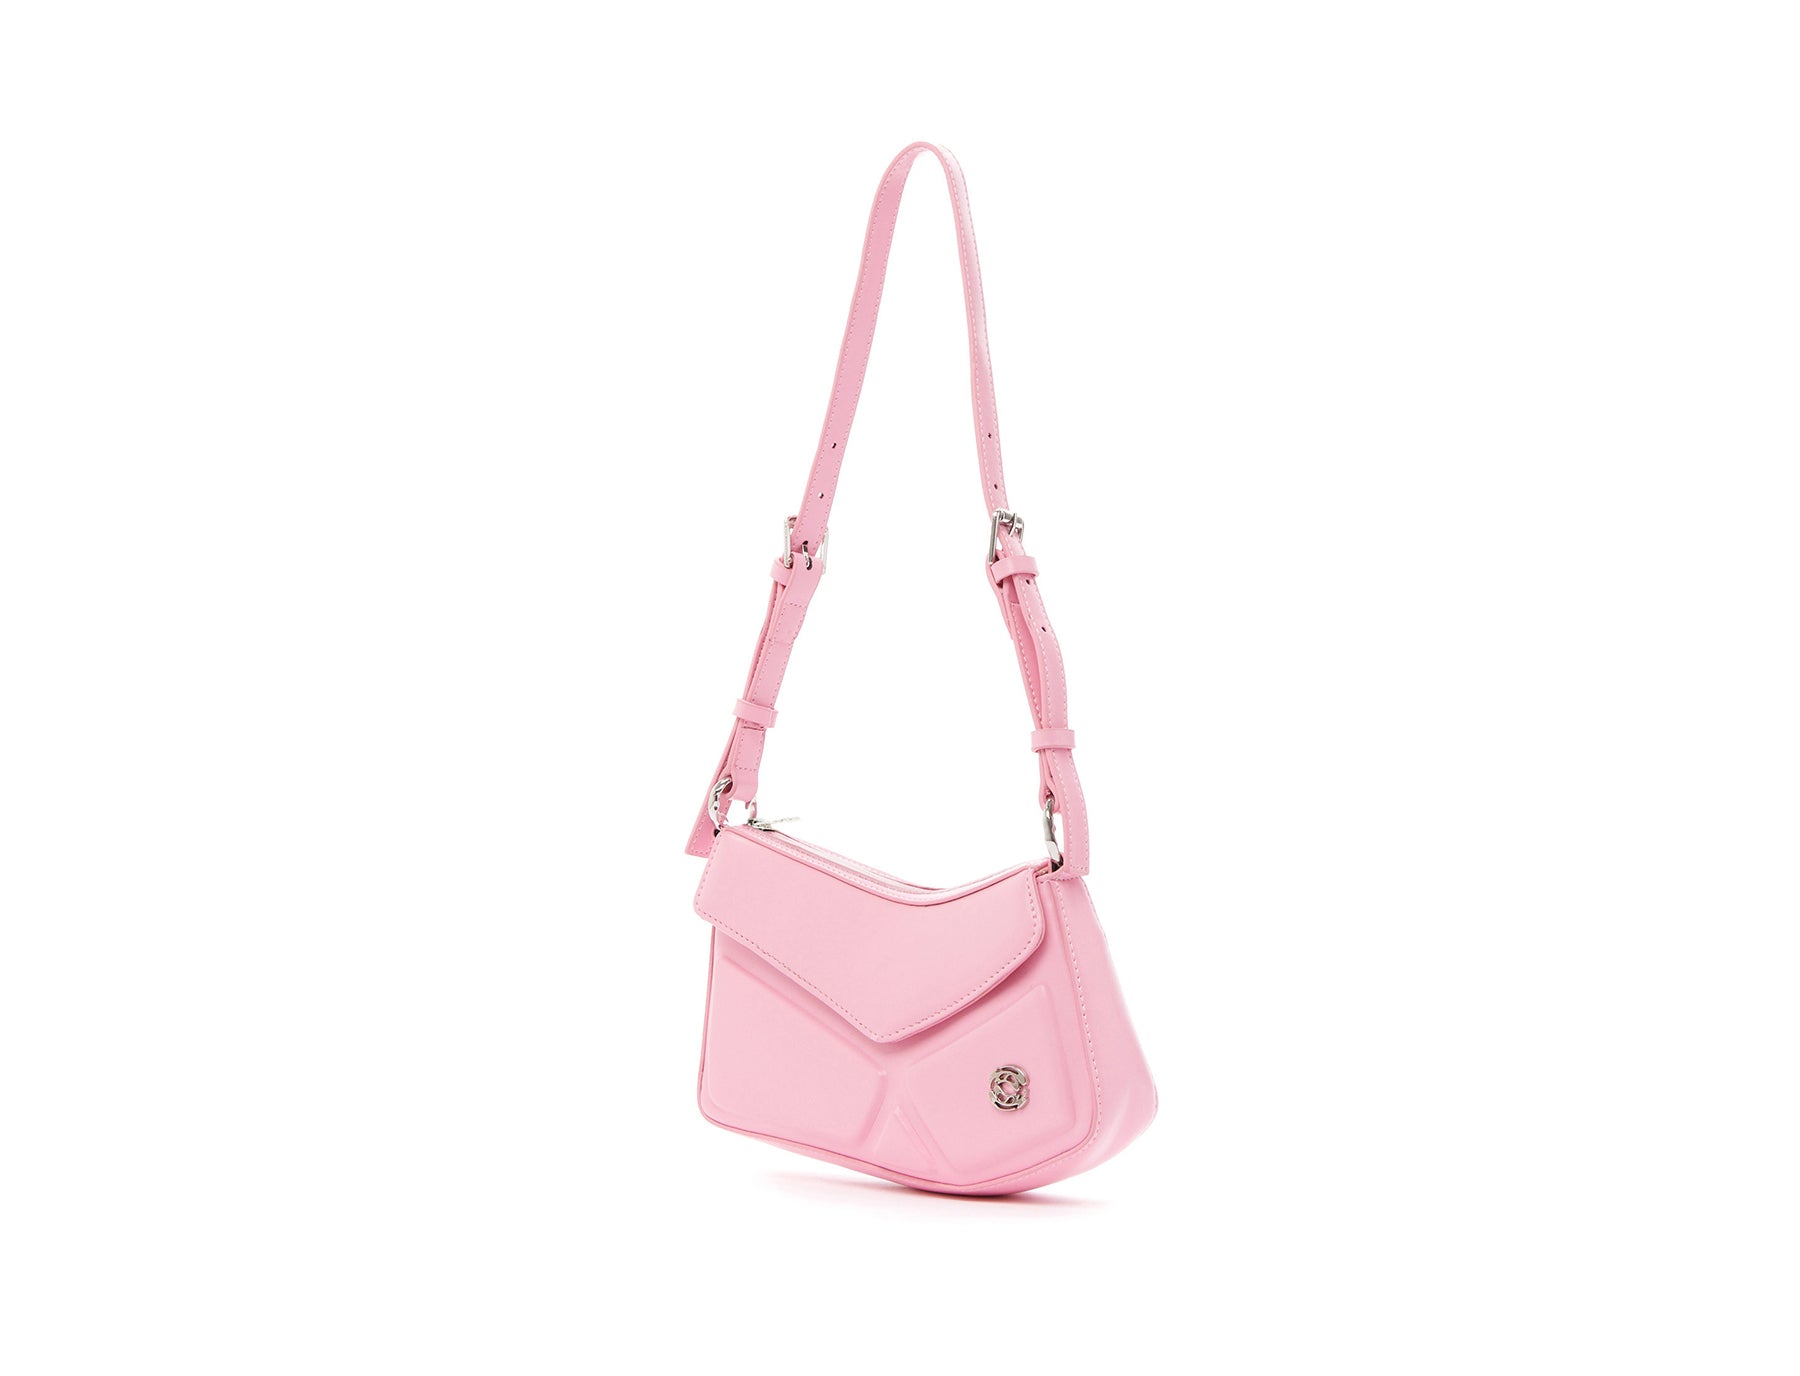 Embryo Mini Pink Leather Bag - Rombaut - Accessories